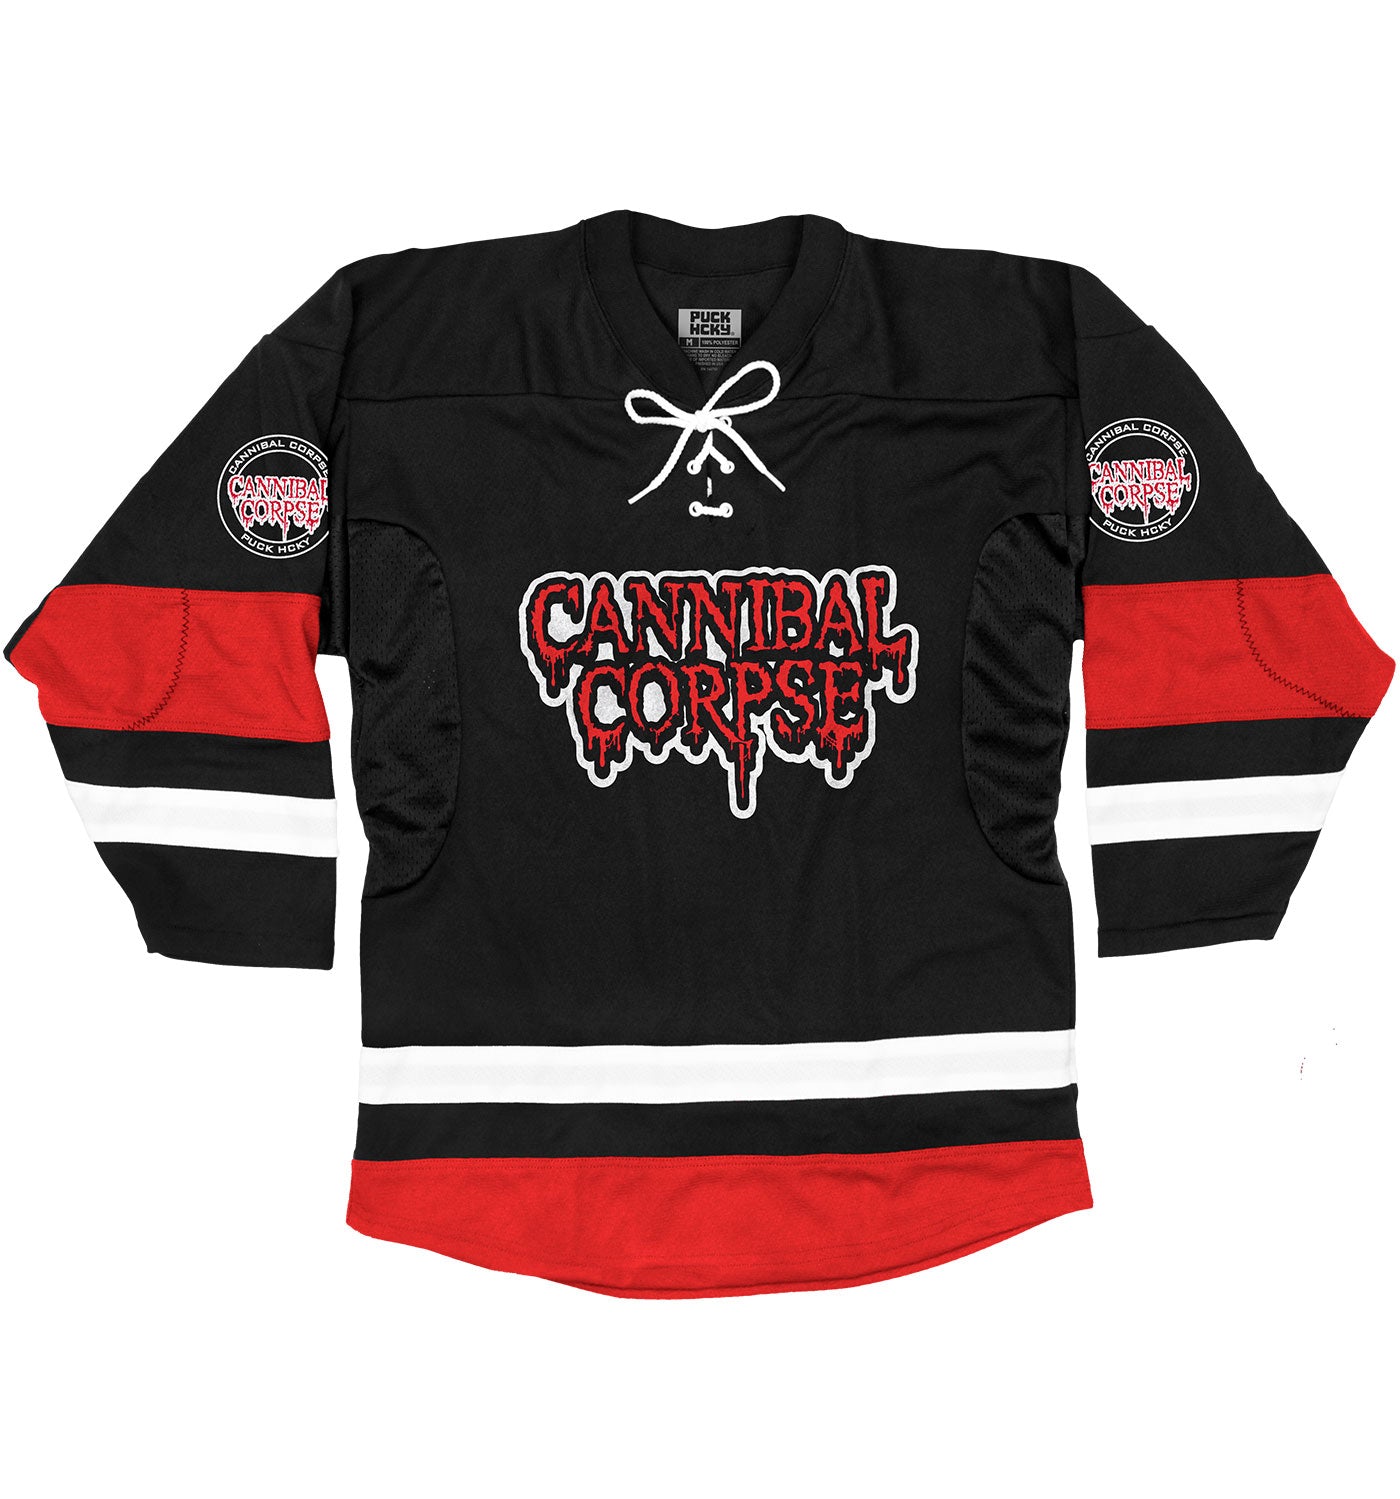 CANNIBAL CORPSE 'HOCKEY CLUB' hockey jersey in black, white, and red front view